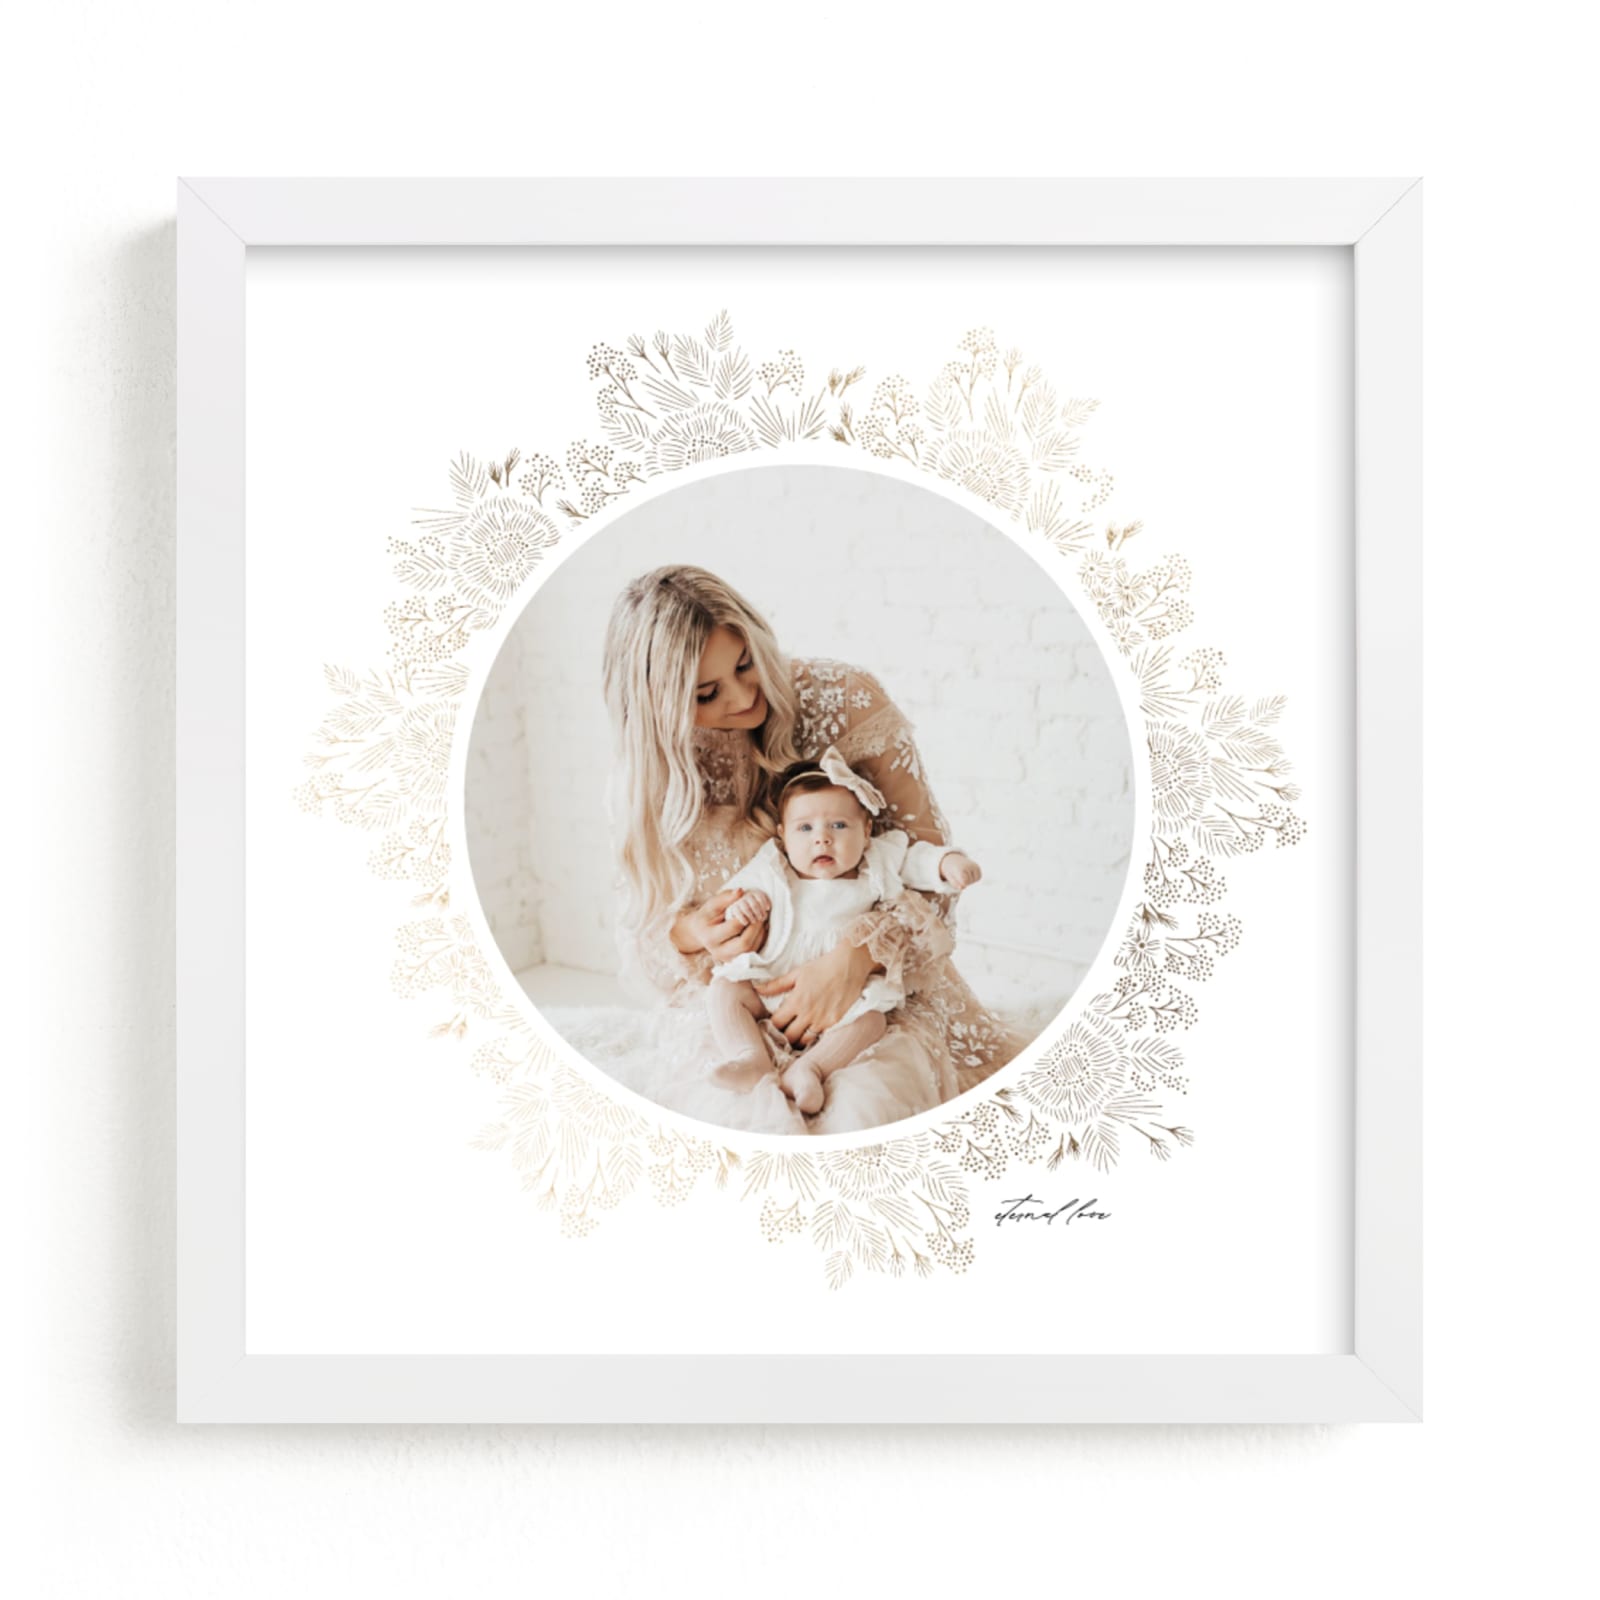 This is a gold foil stamped photo art by Tamara Hilje called Gilded Blooms.